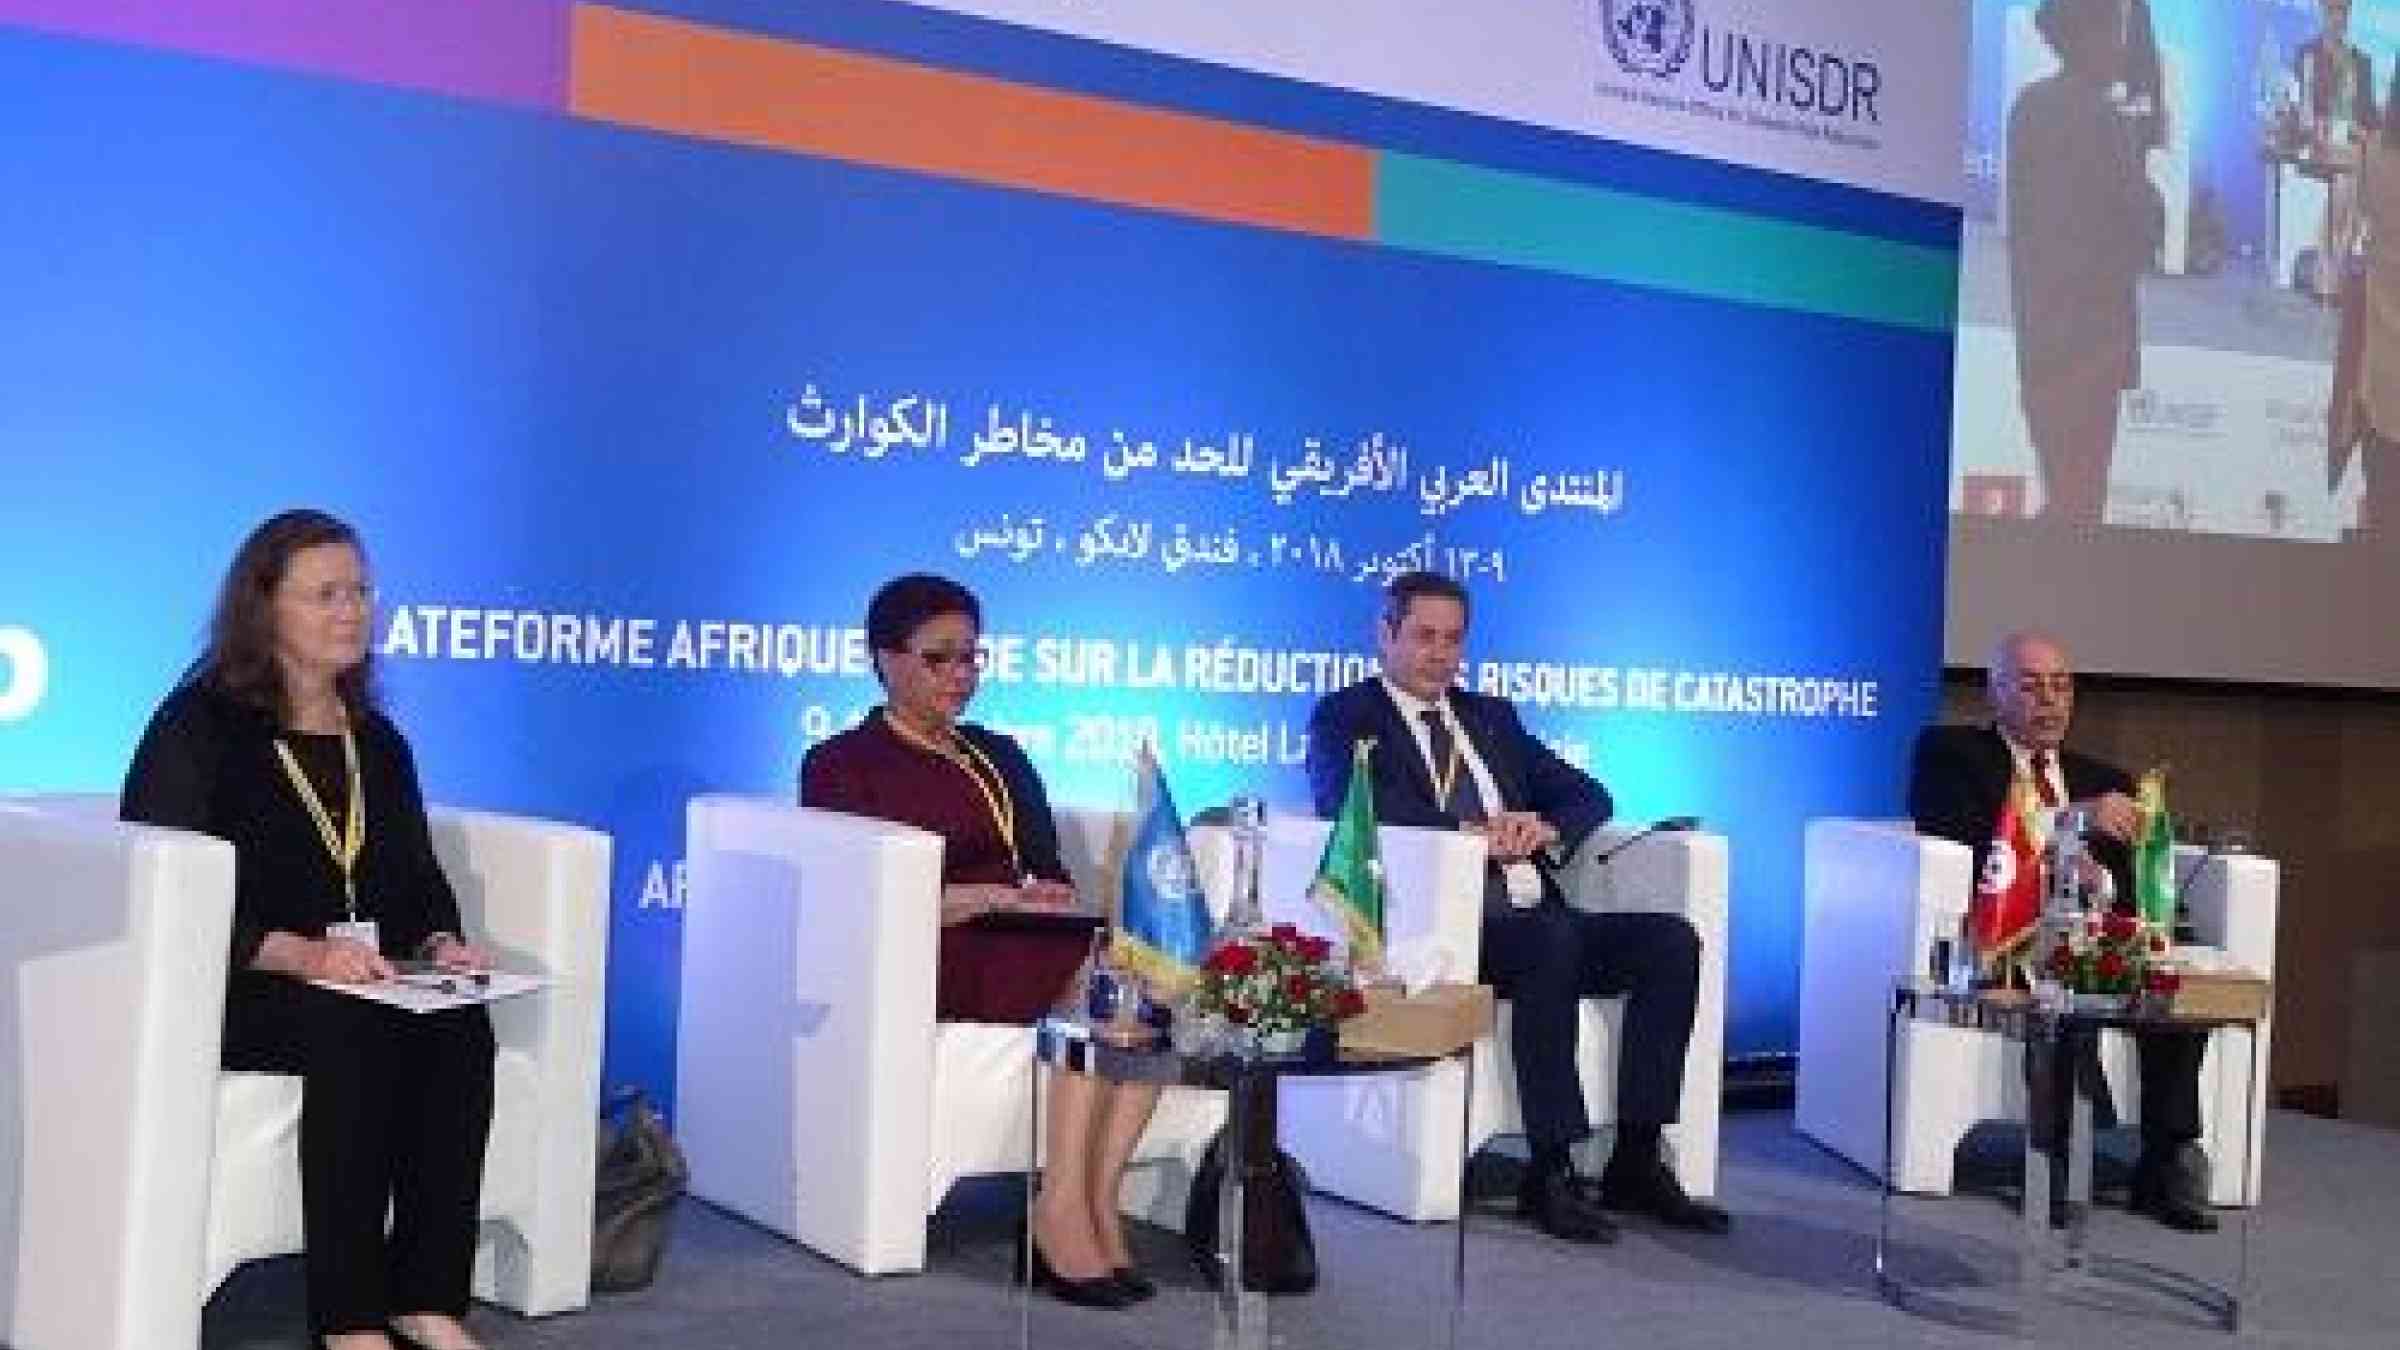 Speakers at the opening ceremony: Kirsi Madi, Director, UNISDR; Ambassador Josefa Sacko, African Union Commisssion; Dr. Riadh Mouakhar, Minister of Local Affairs and Environment, Tunisia; and Abdellatif Abid, Assistant Secretary-General, League of Arab States.